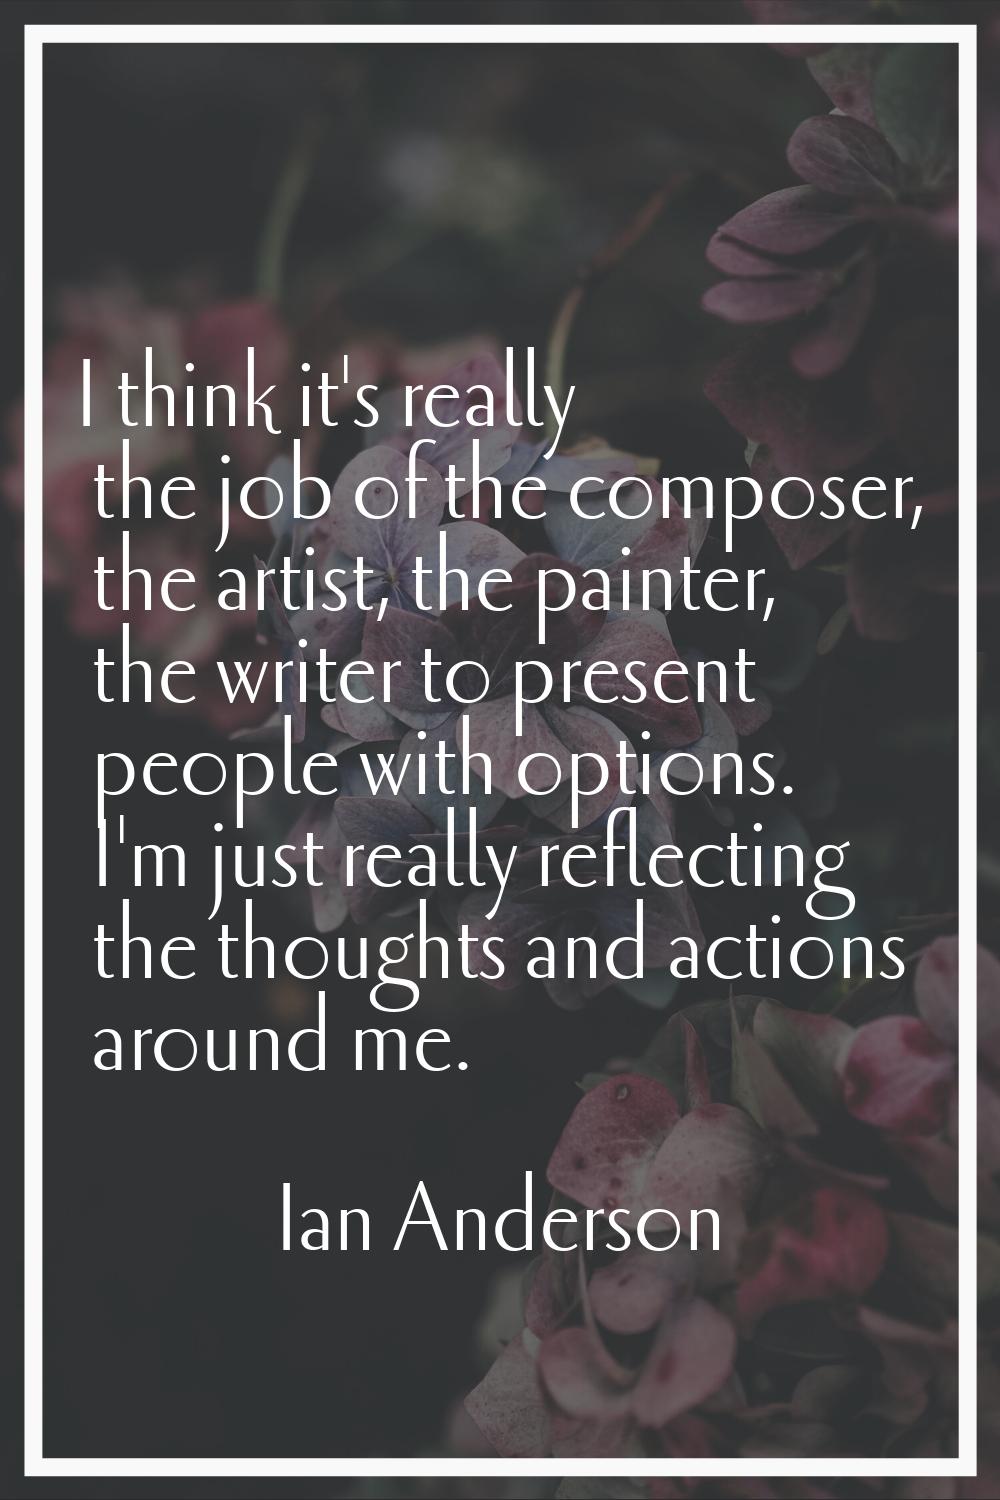 I think it's really the job of the composer, the artist, the painter, the writer to present people 